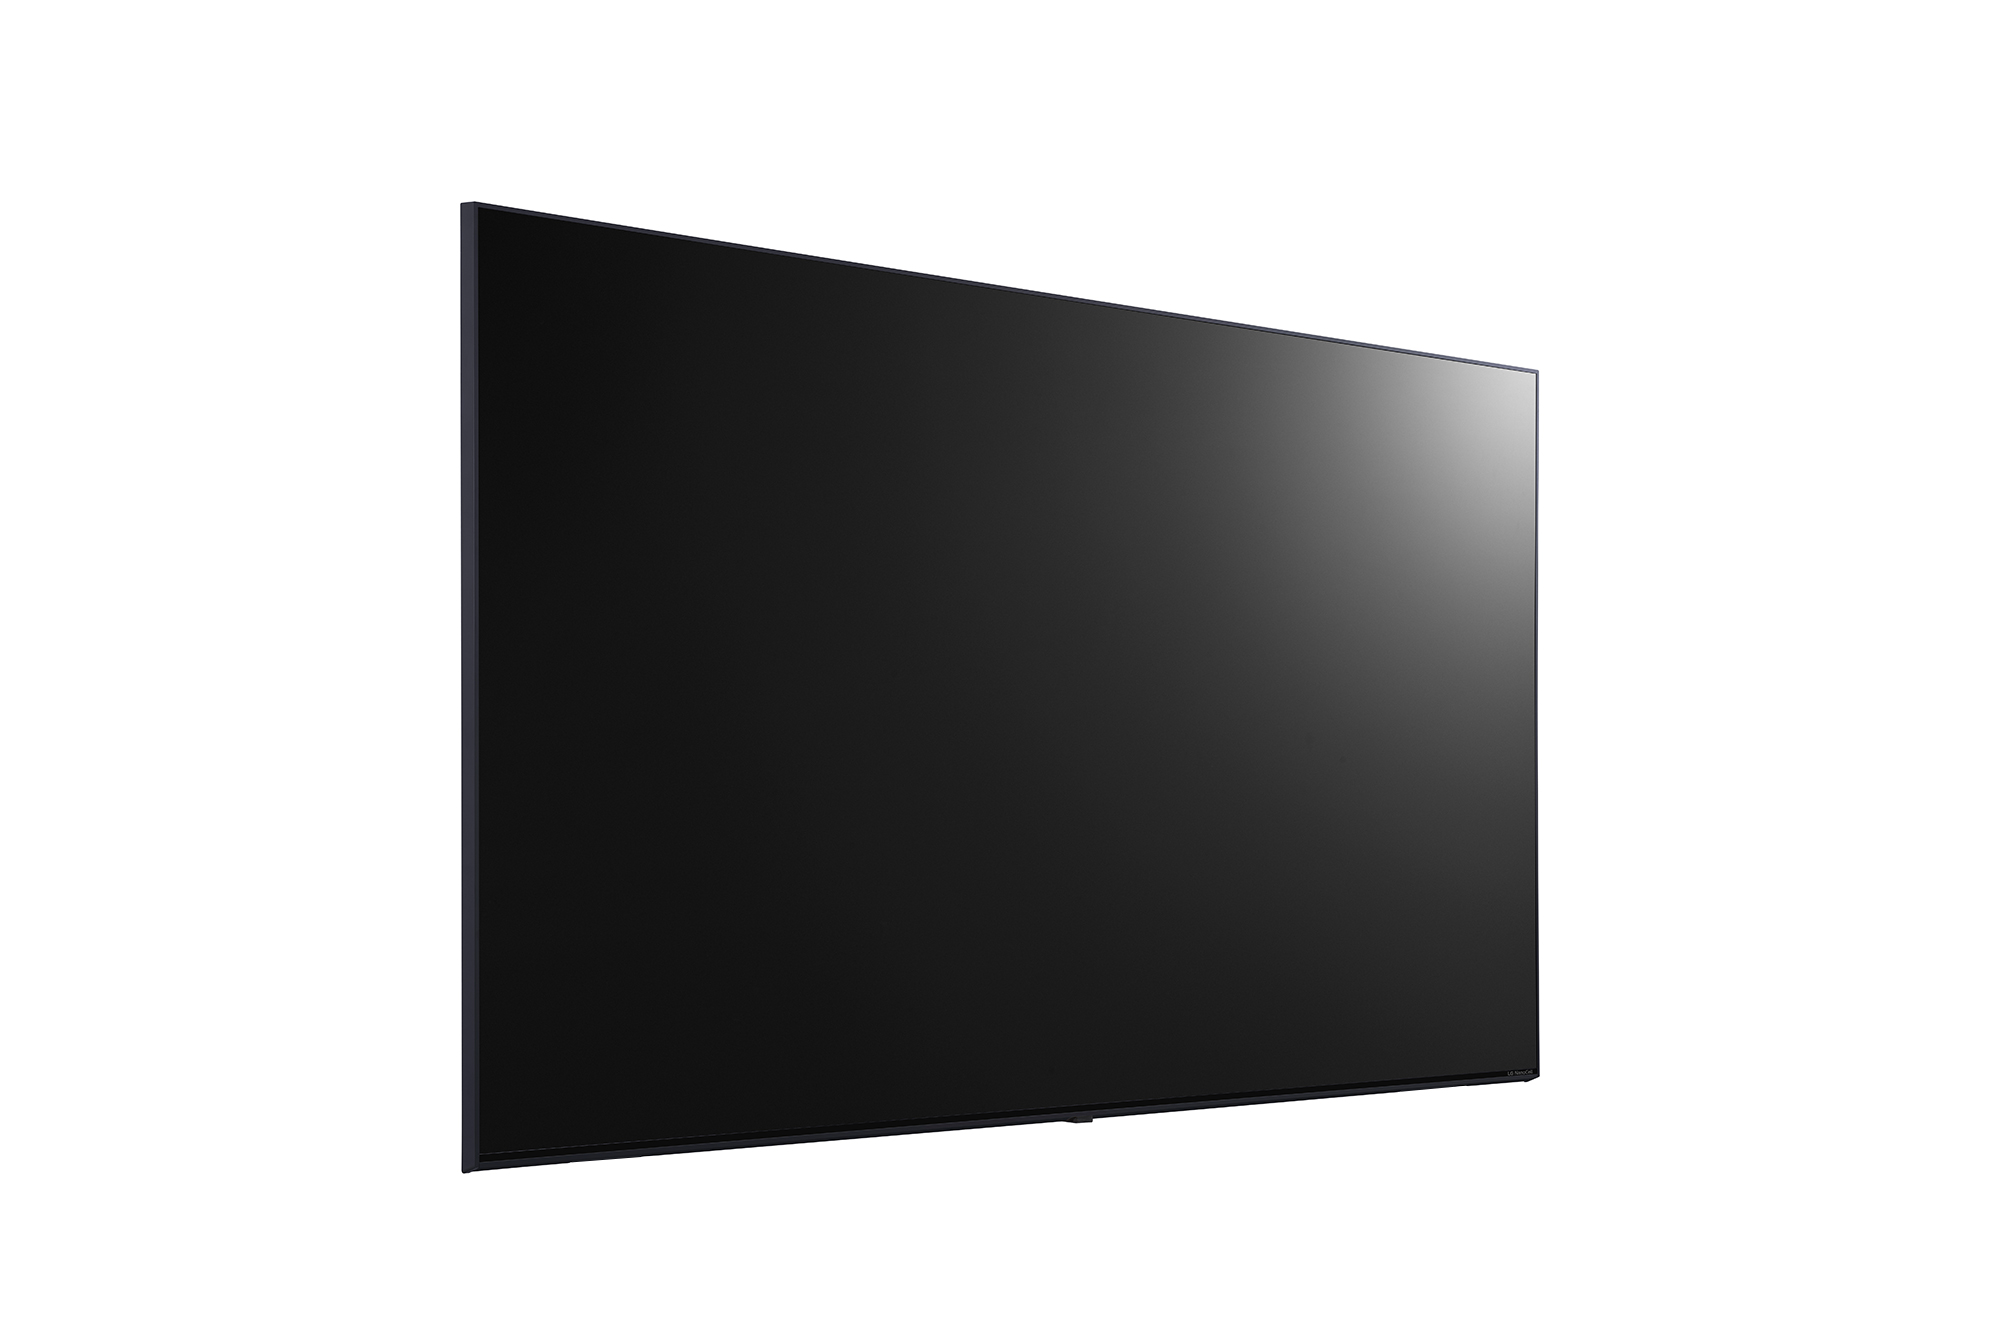 Commercial TV UR772M (NA), -90 degree side view